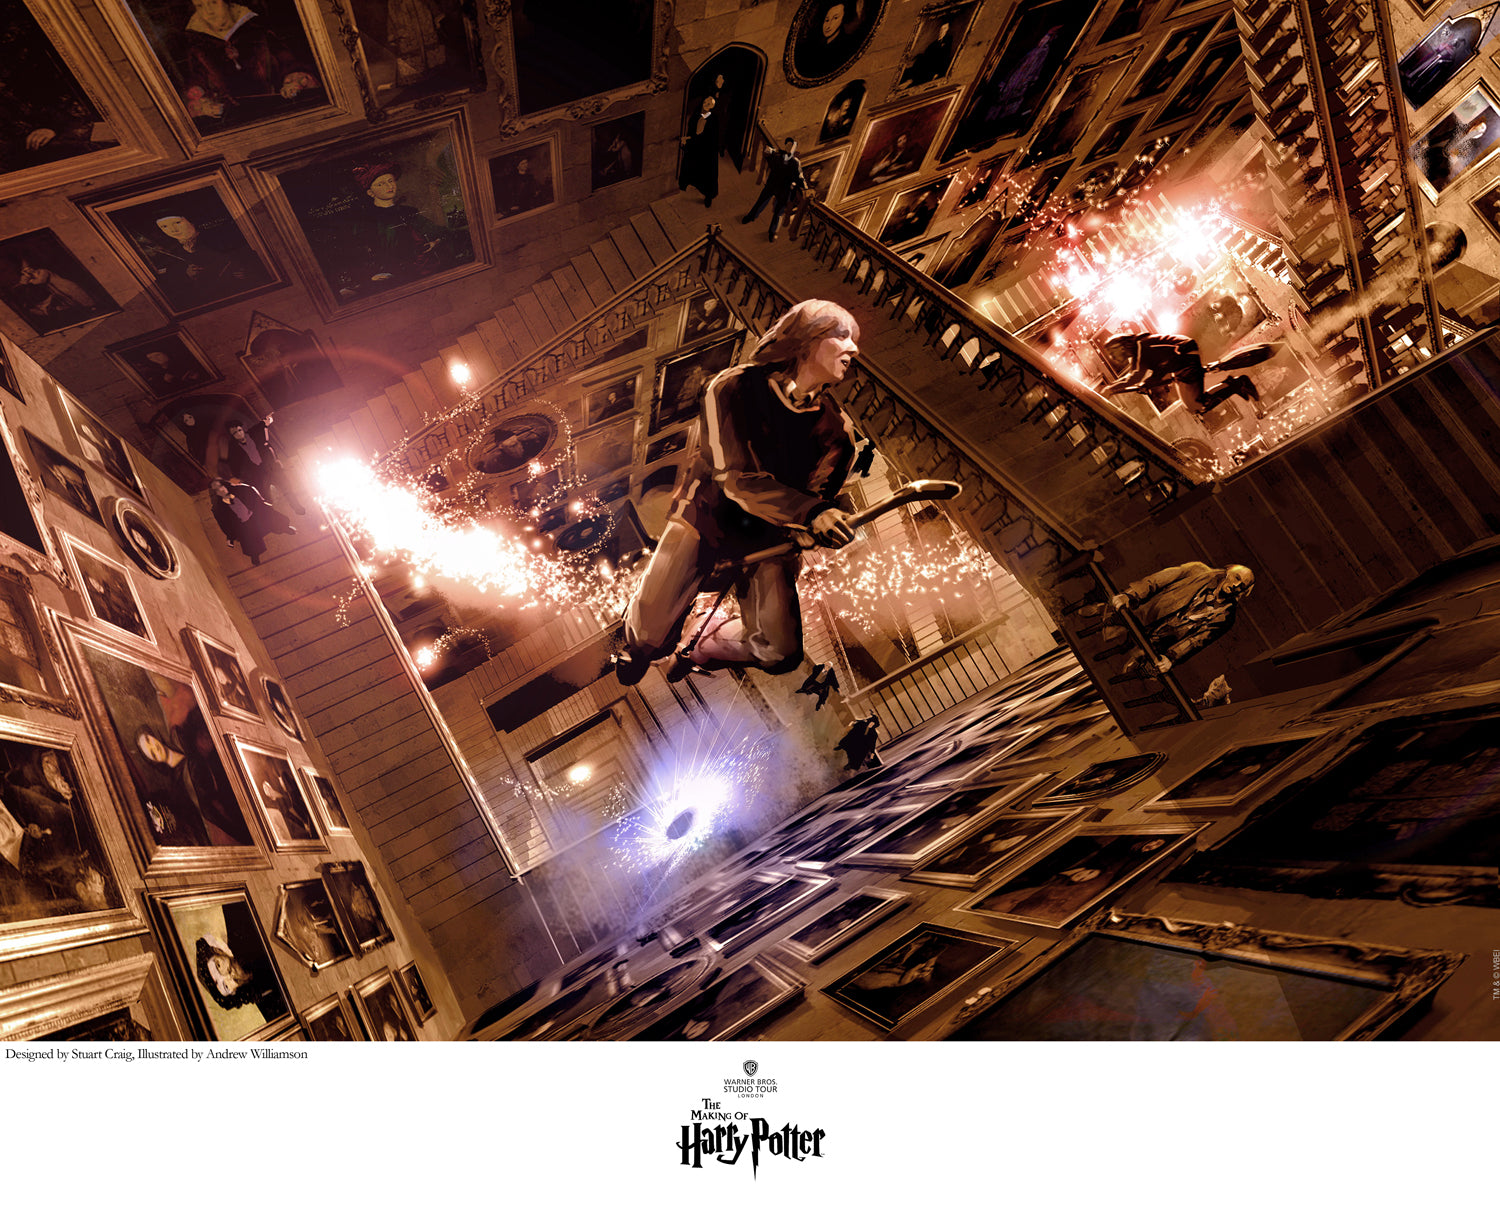 Fred and George Weasley flying on their magical broom sticks over the Great Hall, from the movie Harry Potter and the Order of the Phoenix.